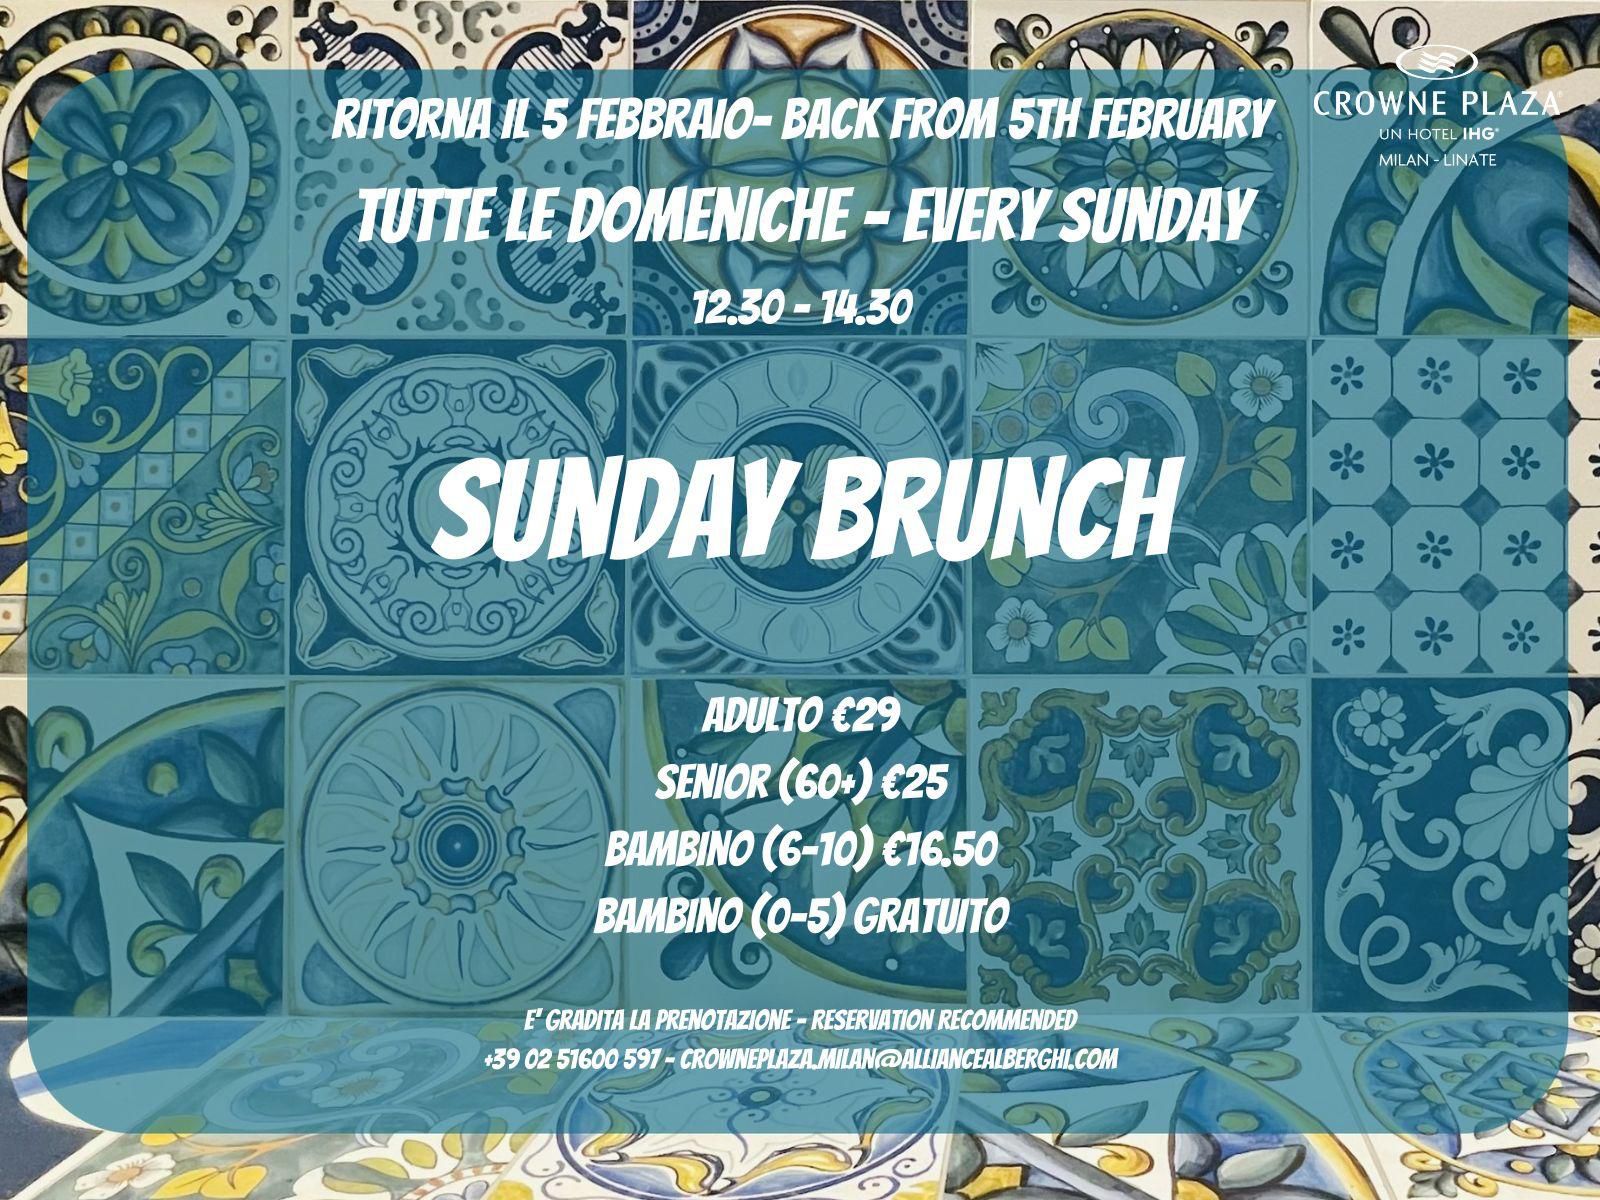 Sunday Brunch is back since 5th February, every week from 12:30 to 14:30, with a delicious choice of Italian and international dishes. Kids corner available.